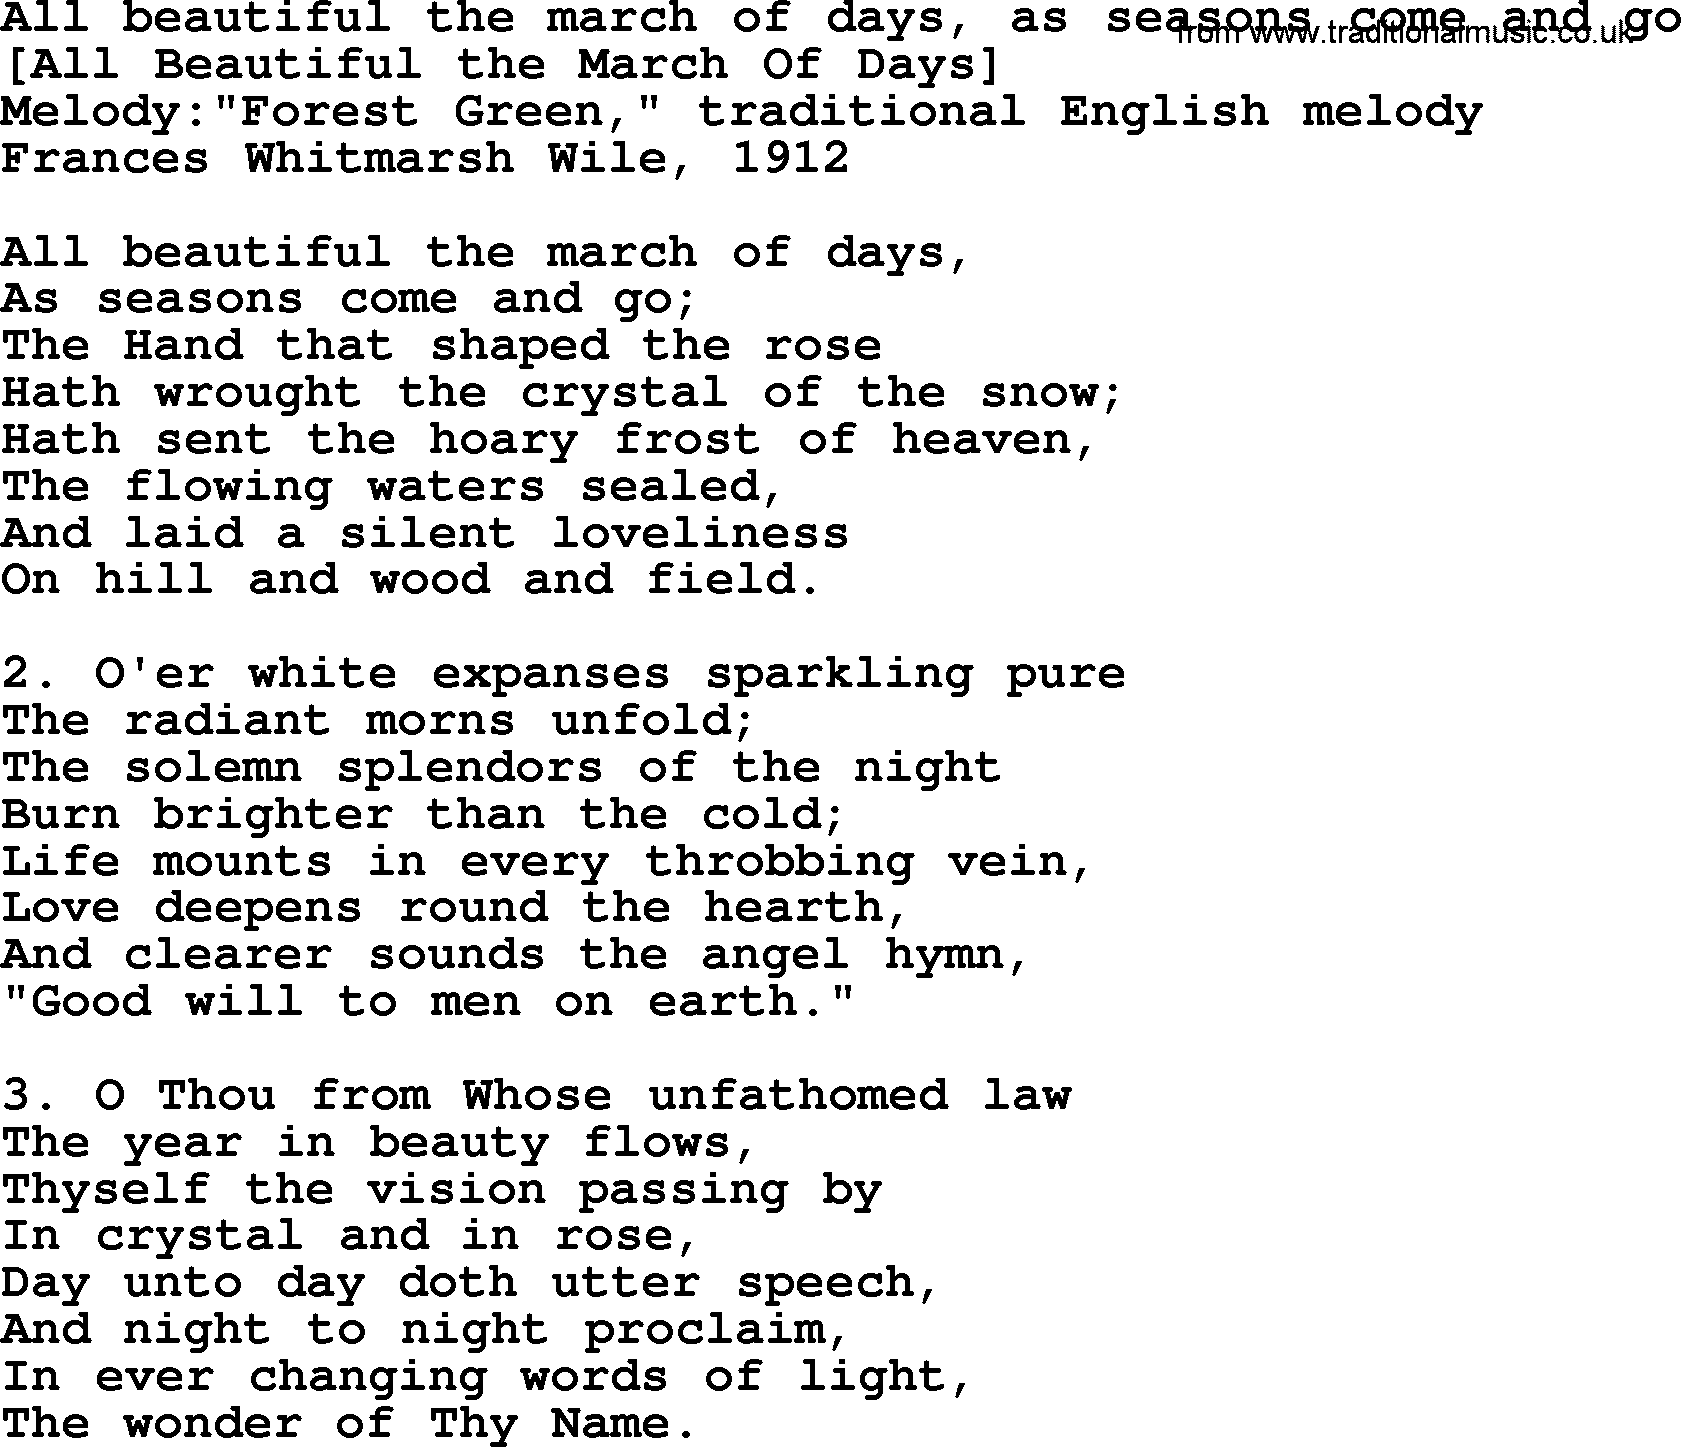 Old American Song Lyrics For All Beautiful The March Of Days As